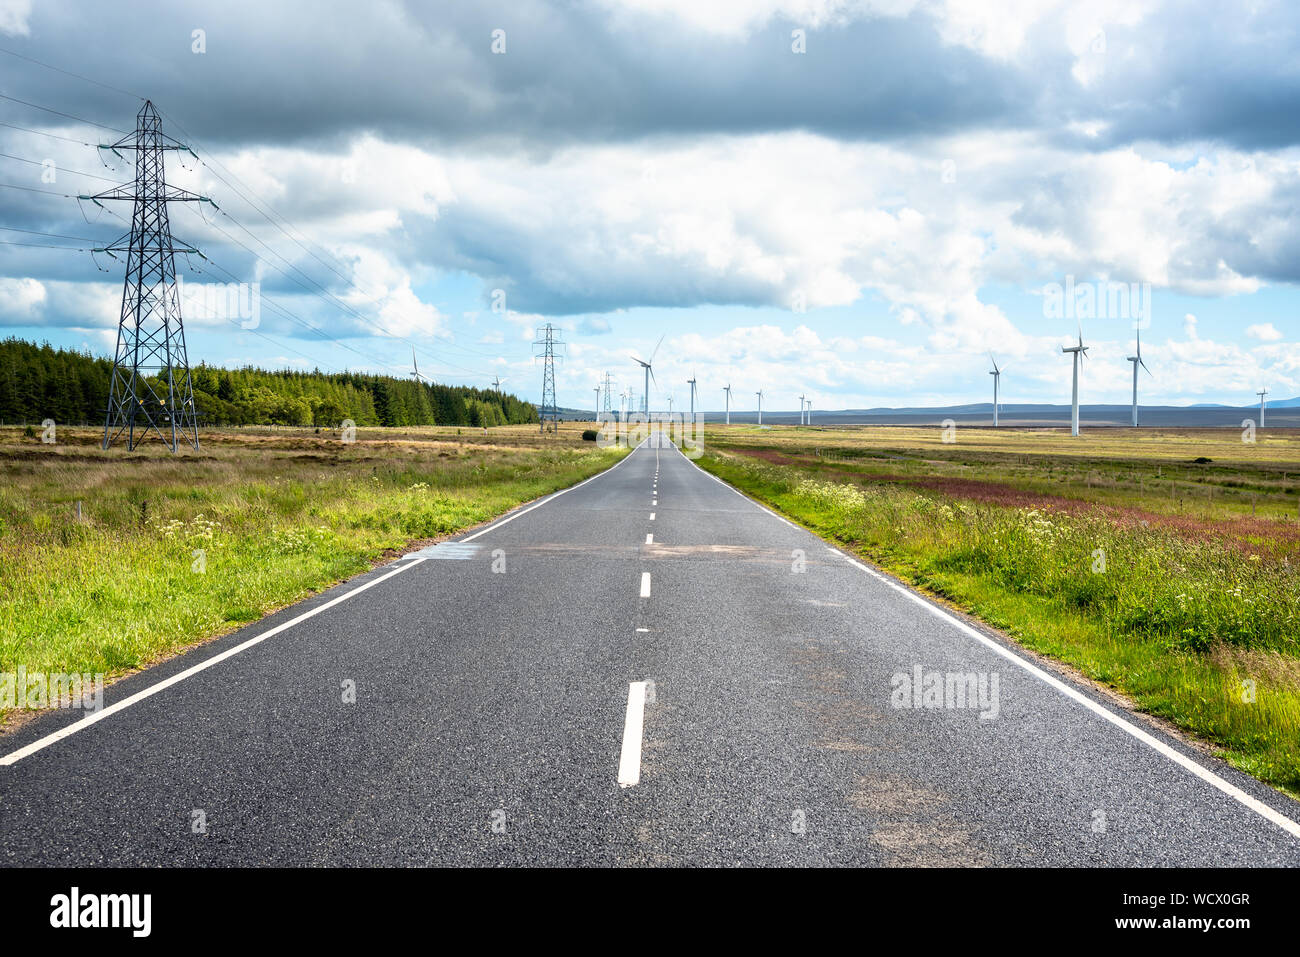 Deserted road to a wind farm on a cloudy summer day. High voltage electricity pylons line the road. Stock Photo